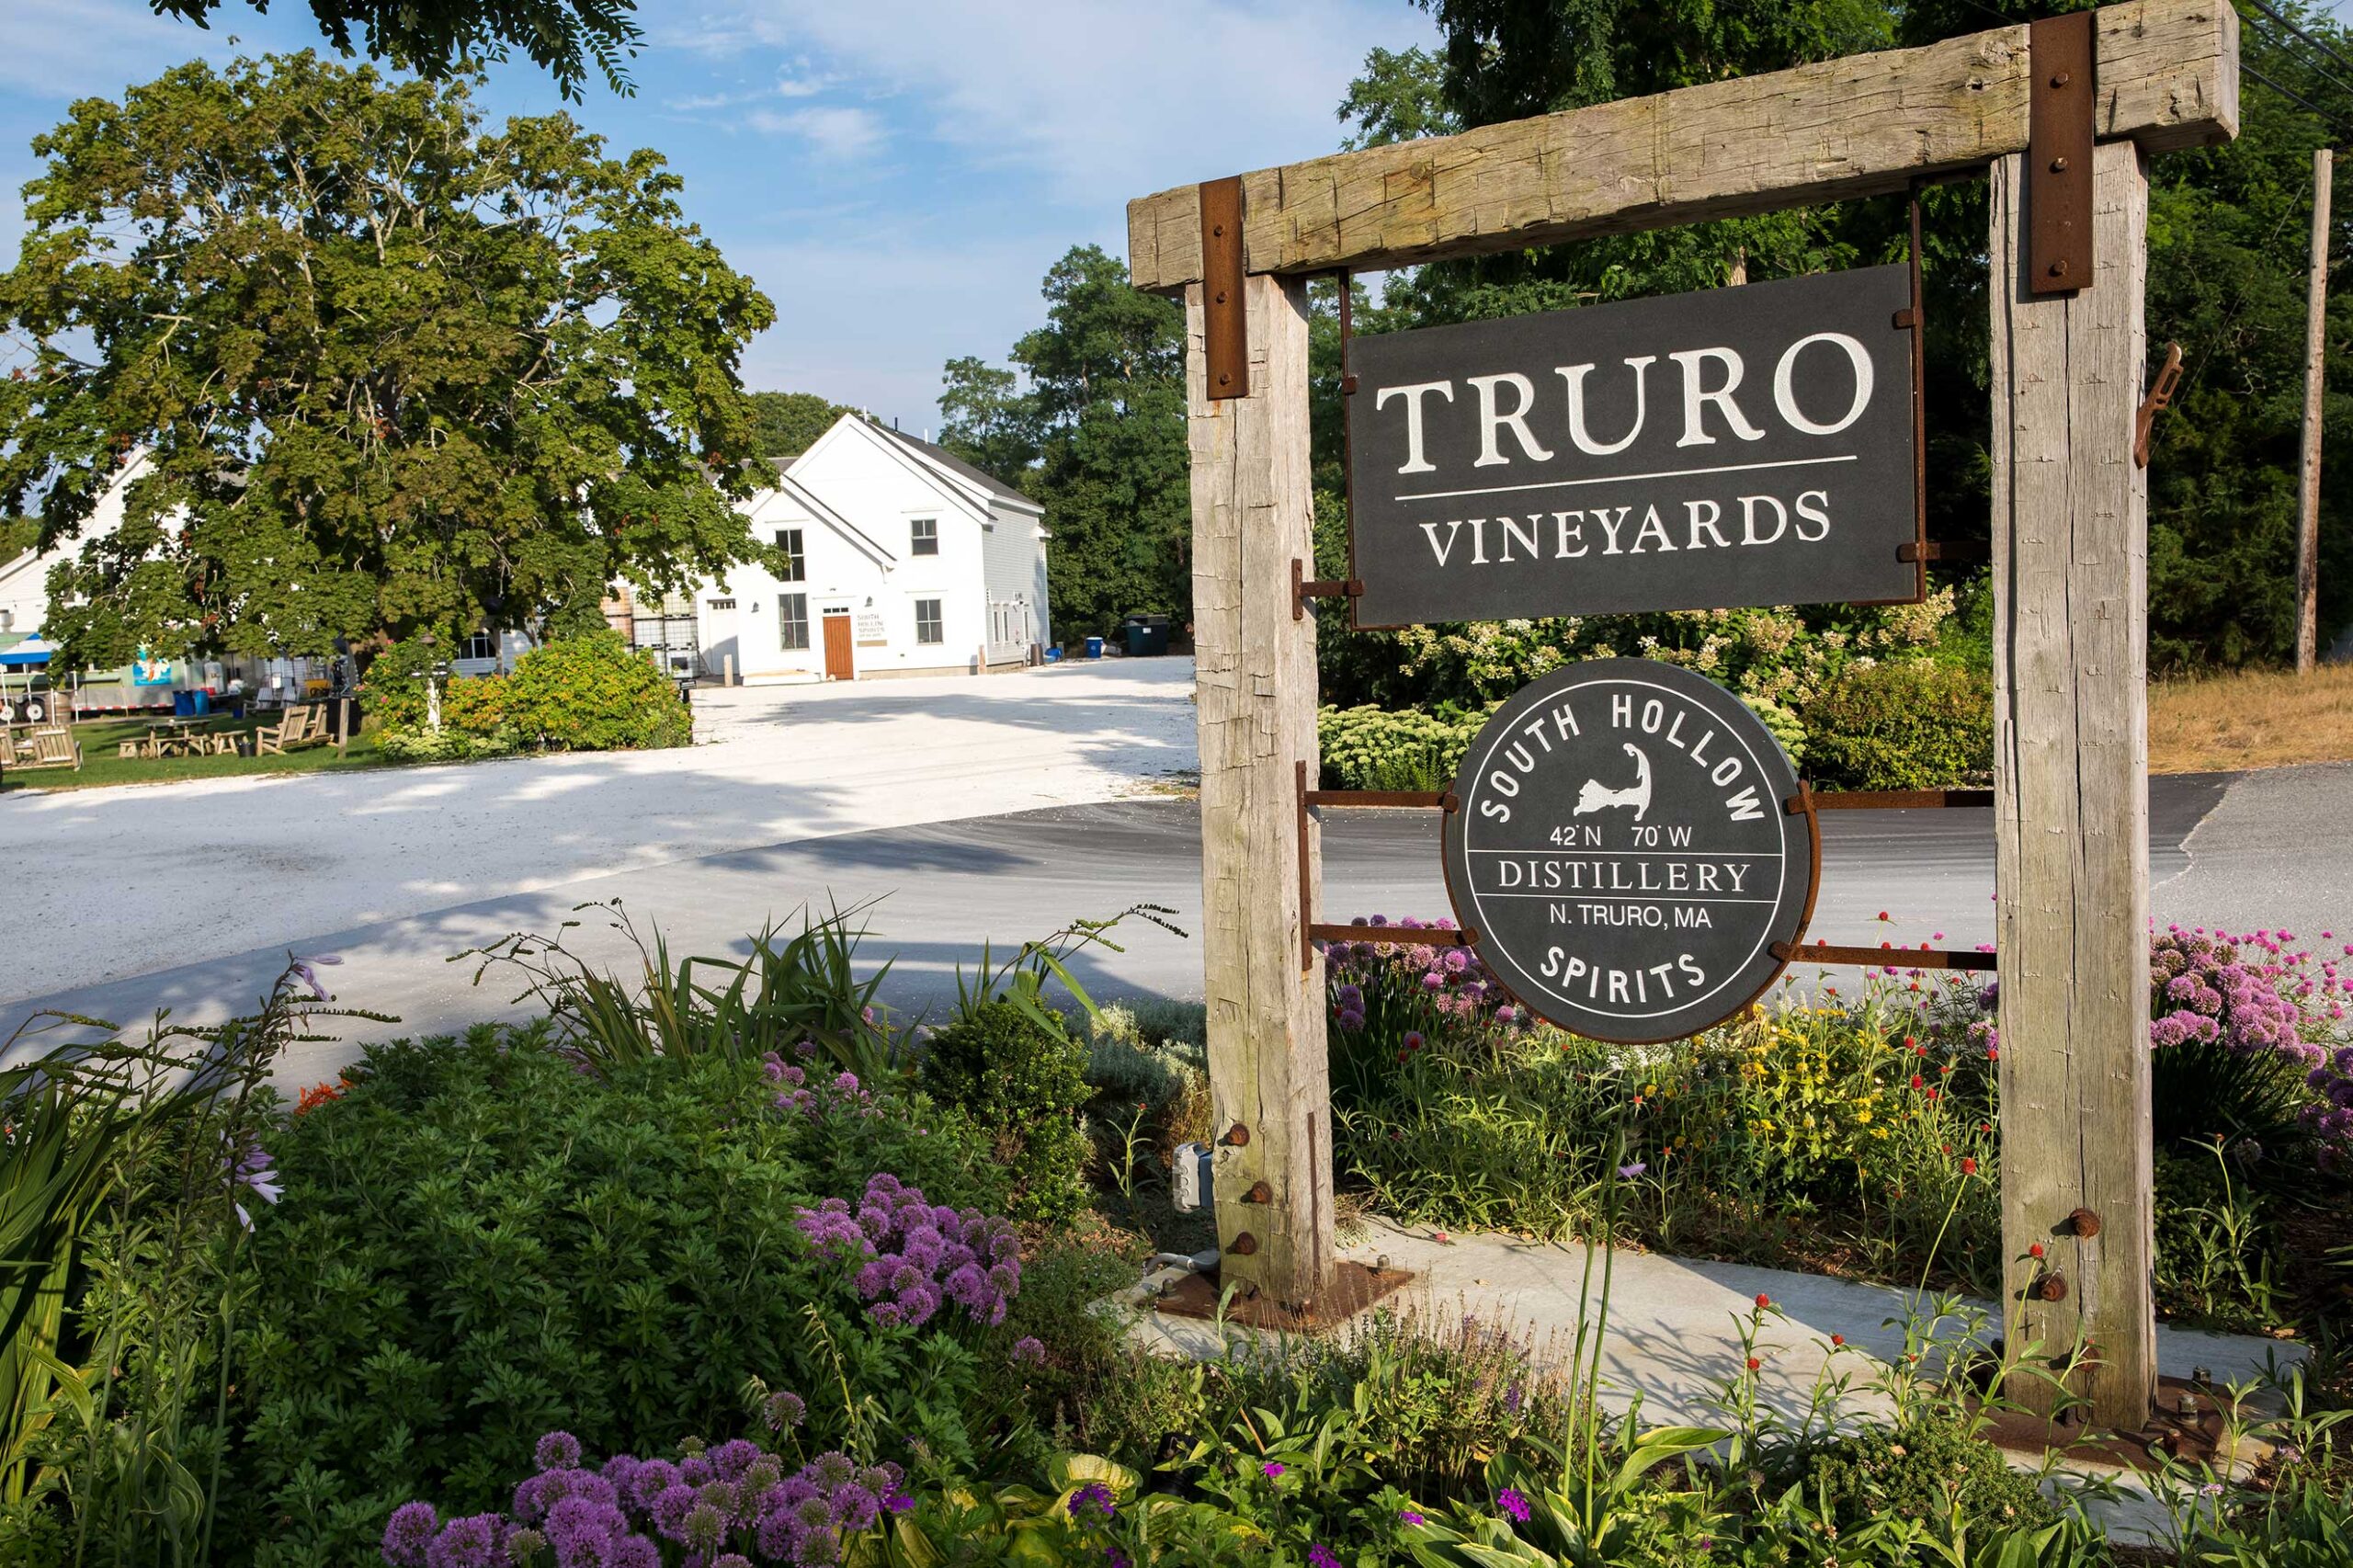 A Labor of Love at Truro Vineyards